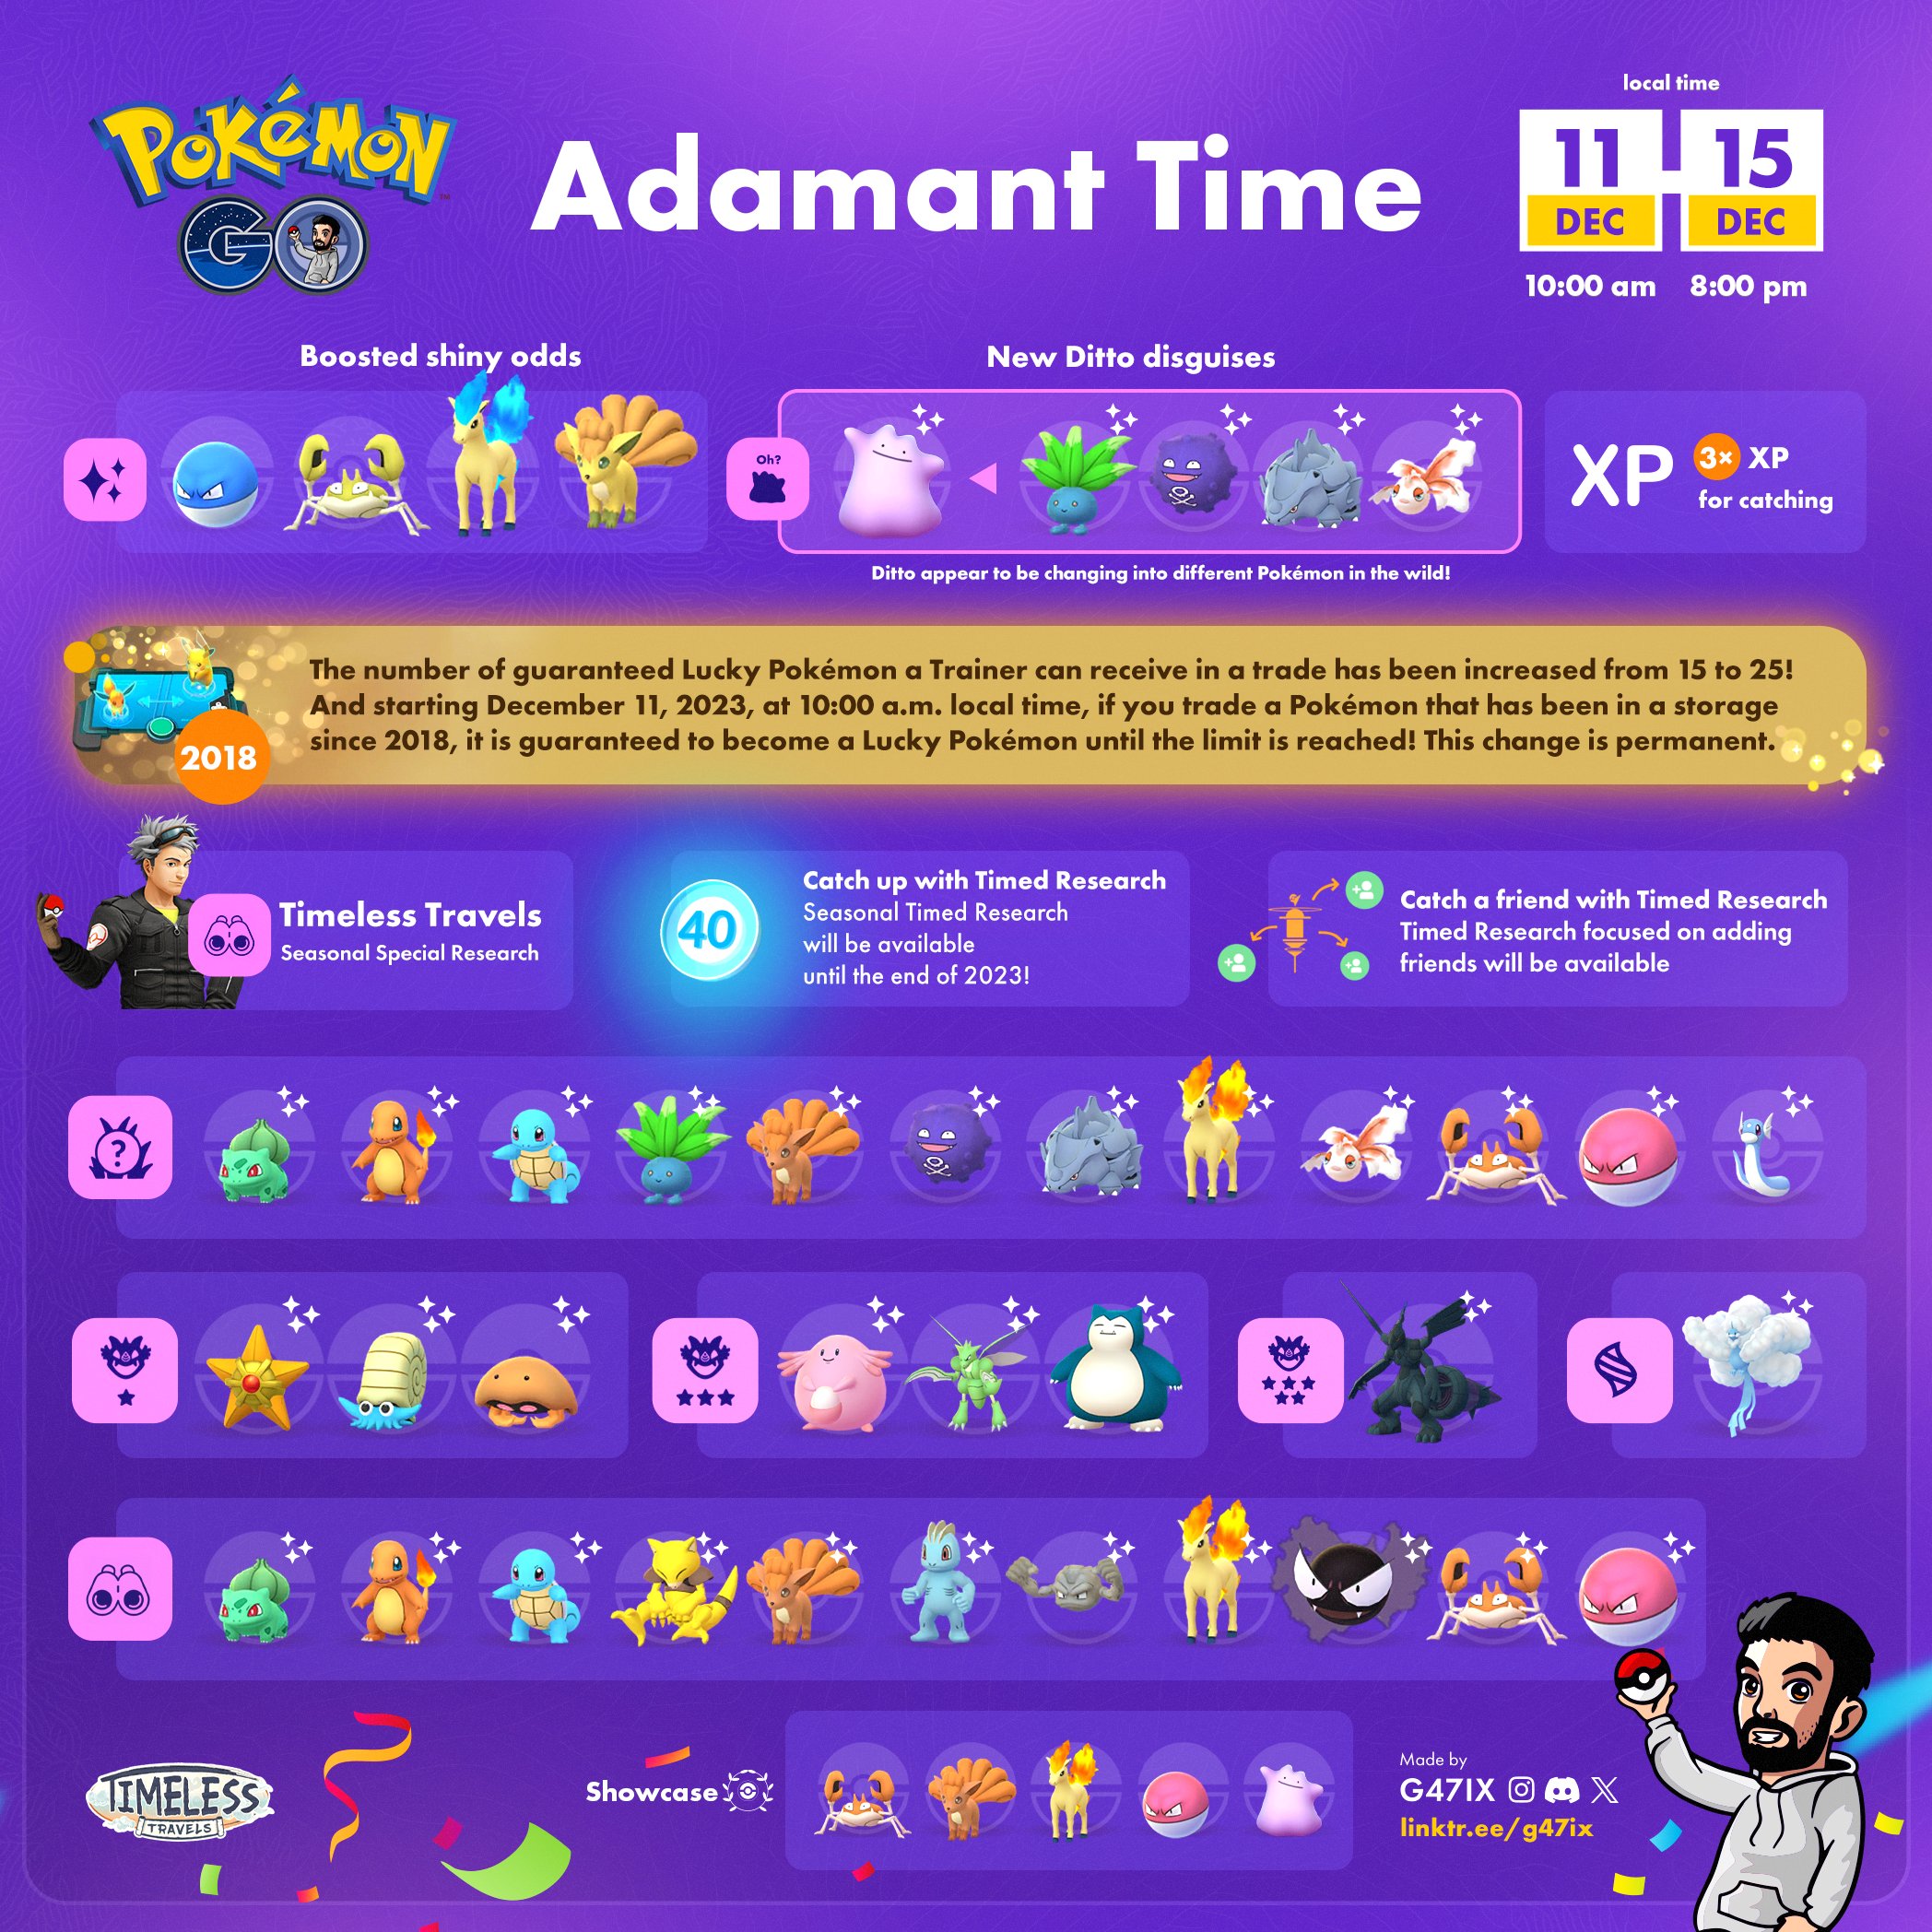 Catch up in time for the Adamant Time event, and party up in a Kanto  comeback! – Pokémon GO